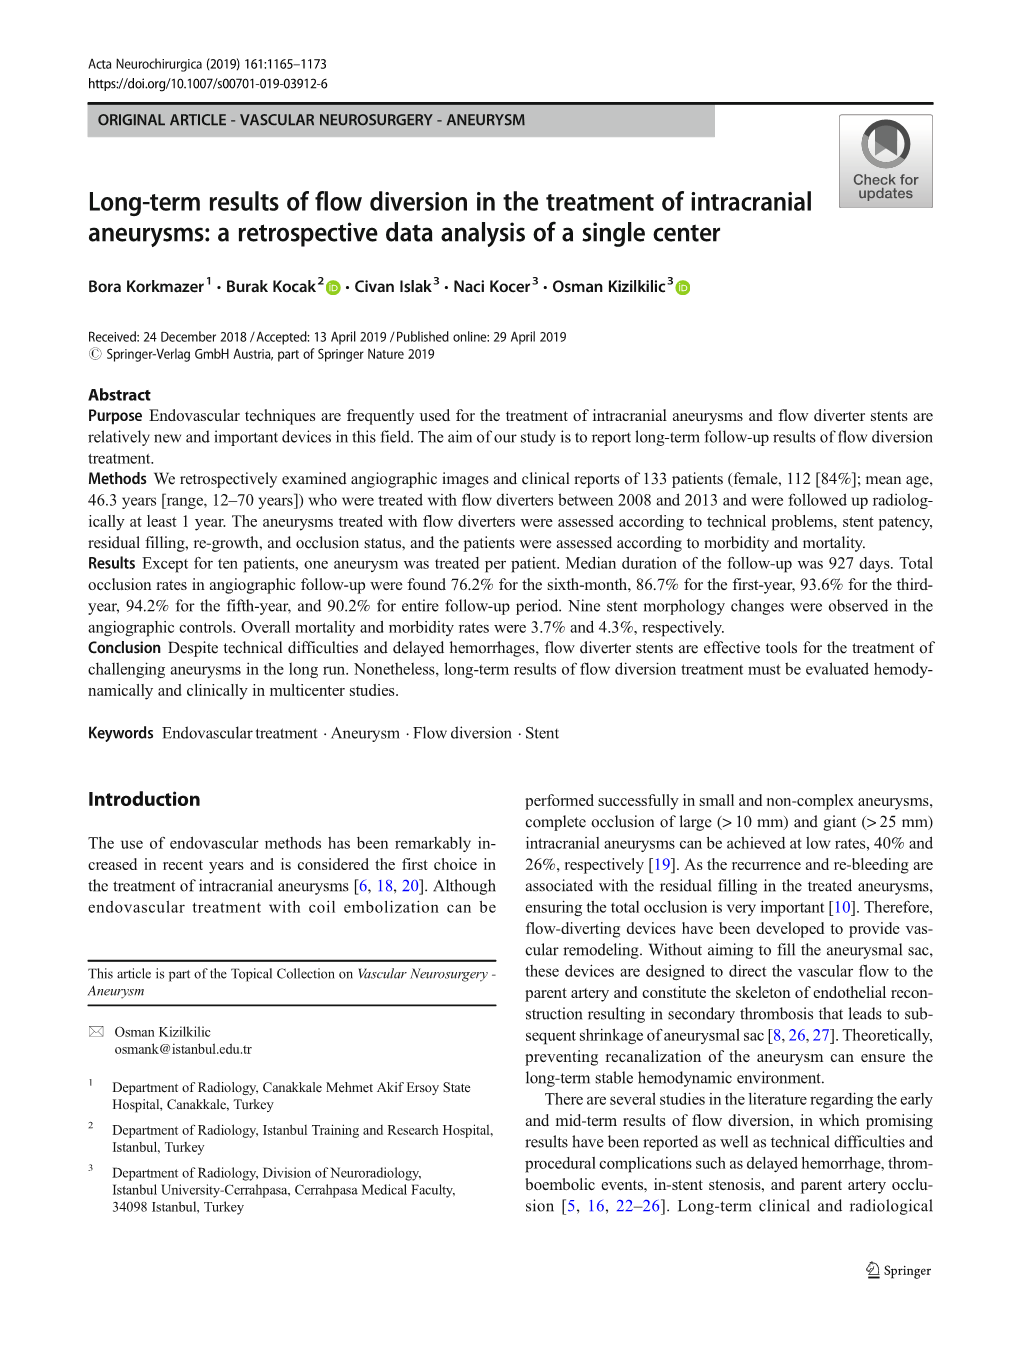 Long-Term Results of Flow Diversion in the Treatment of Intracranial Aneurysms: a Retrospective Data Analysis of a Single Center